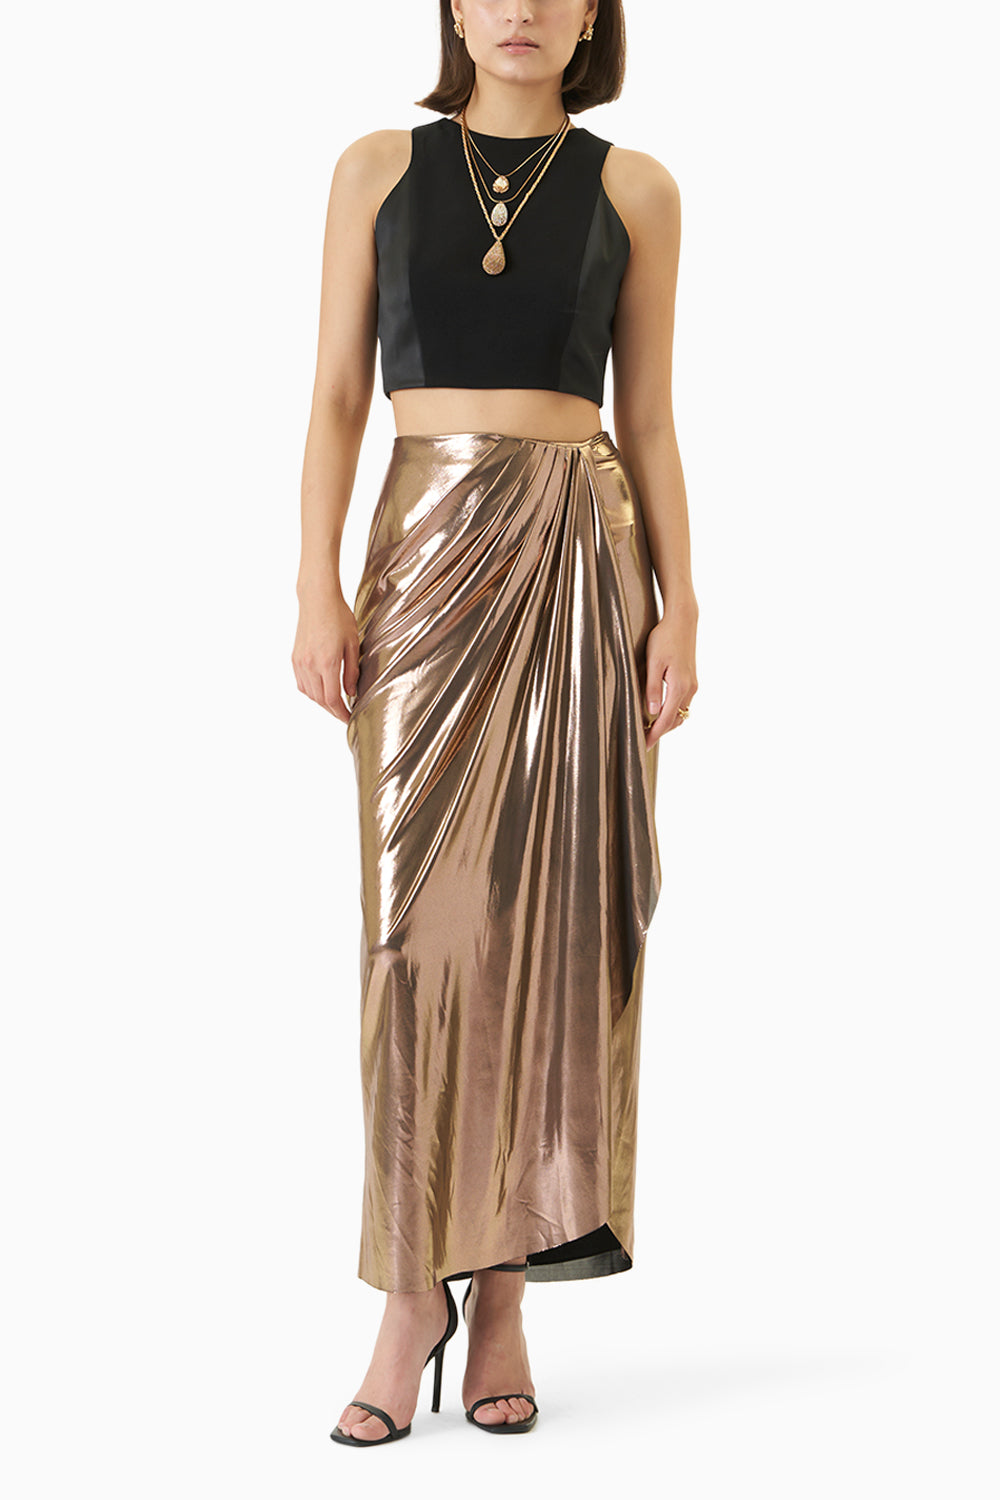 Black Top and Chestnut Gold Pleated Cascade Skirt